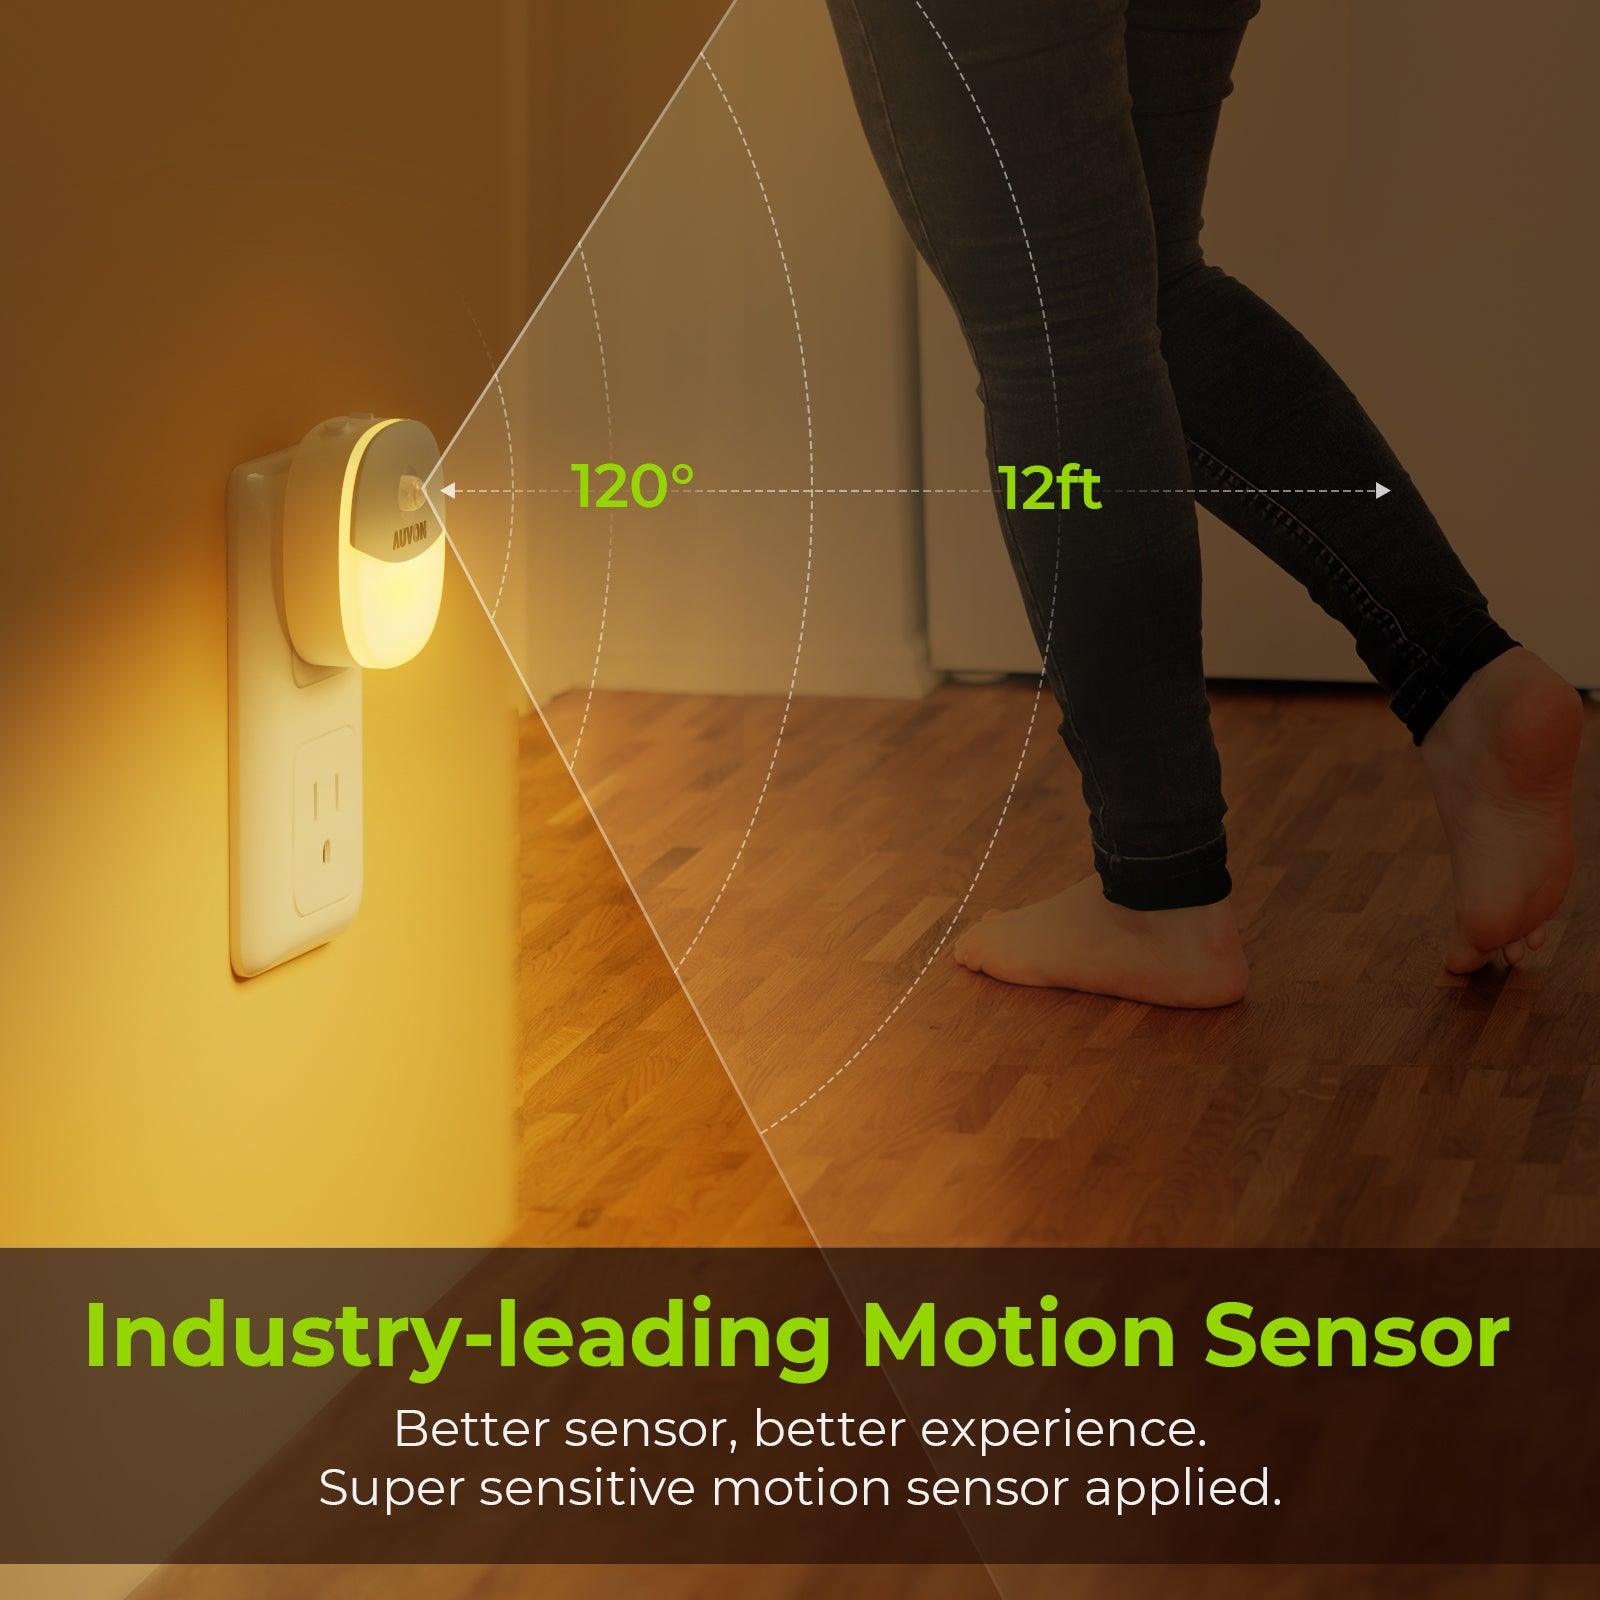 AUVON Plug-in LED Motion Sensor Night Light with Dusk to Dawn